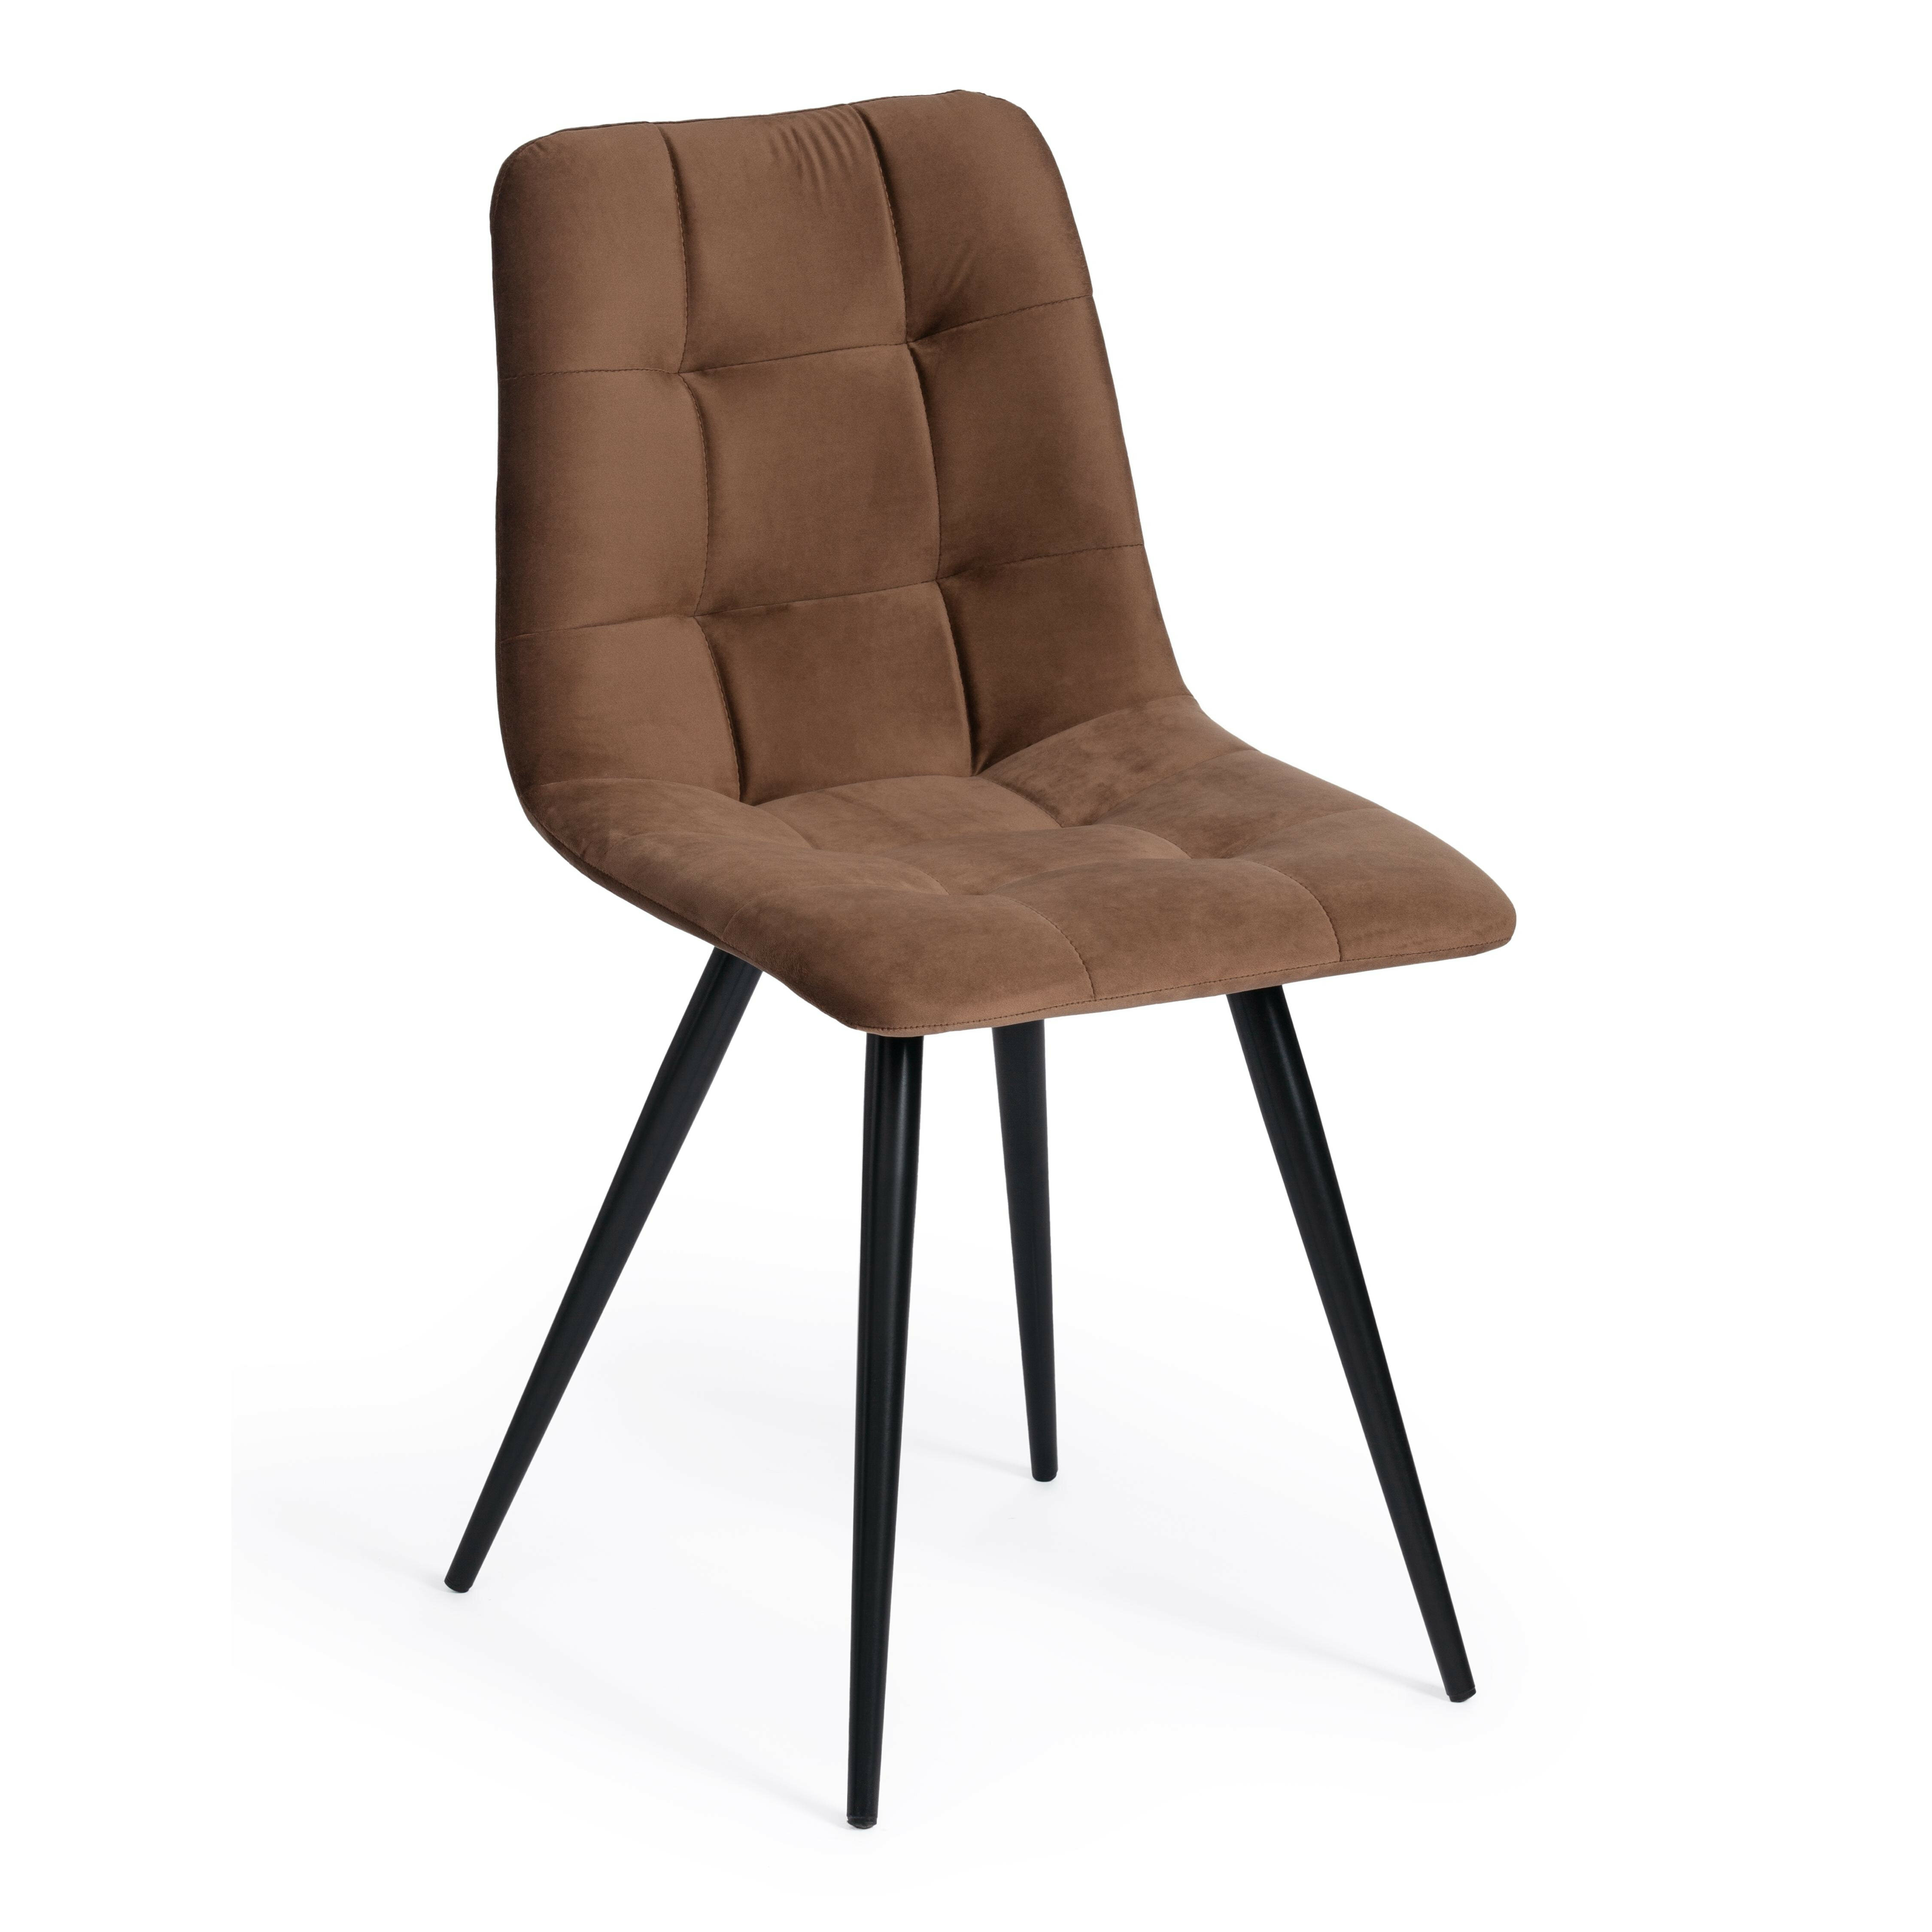  TetChair CHILLY (mod. 7095-1) / 1 .   /,  barkhat 12/